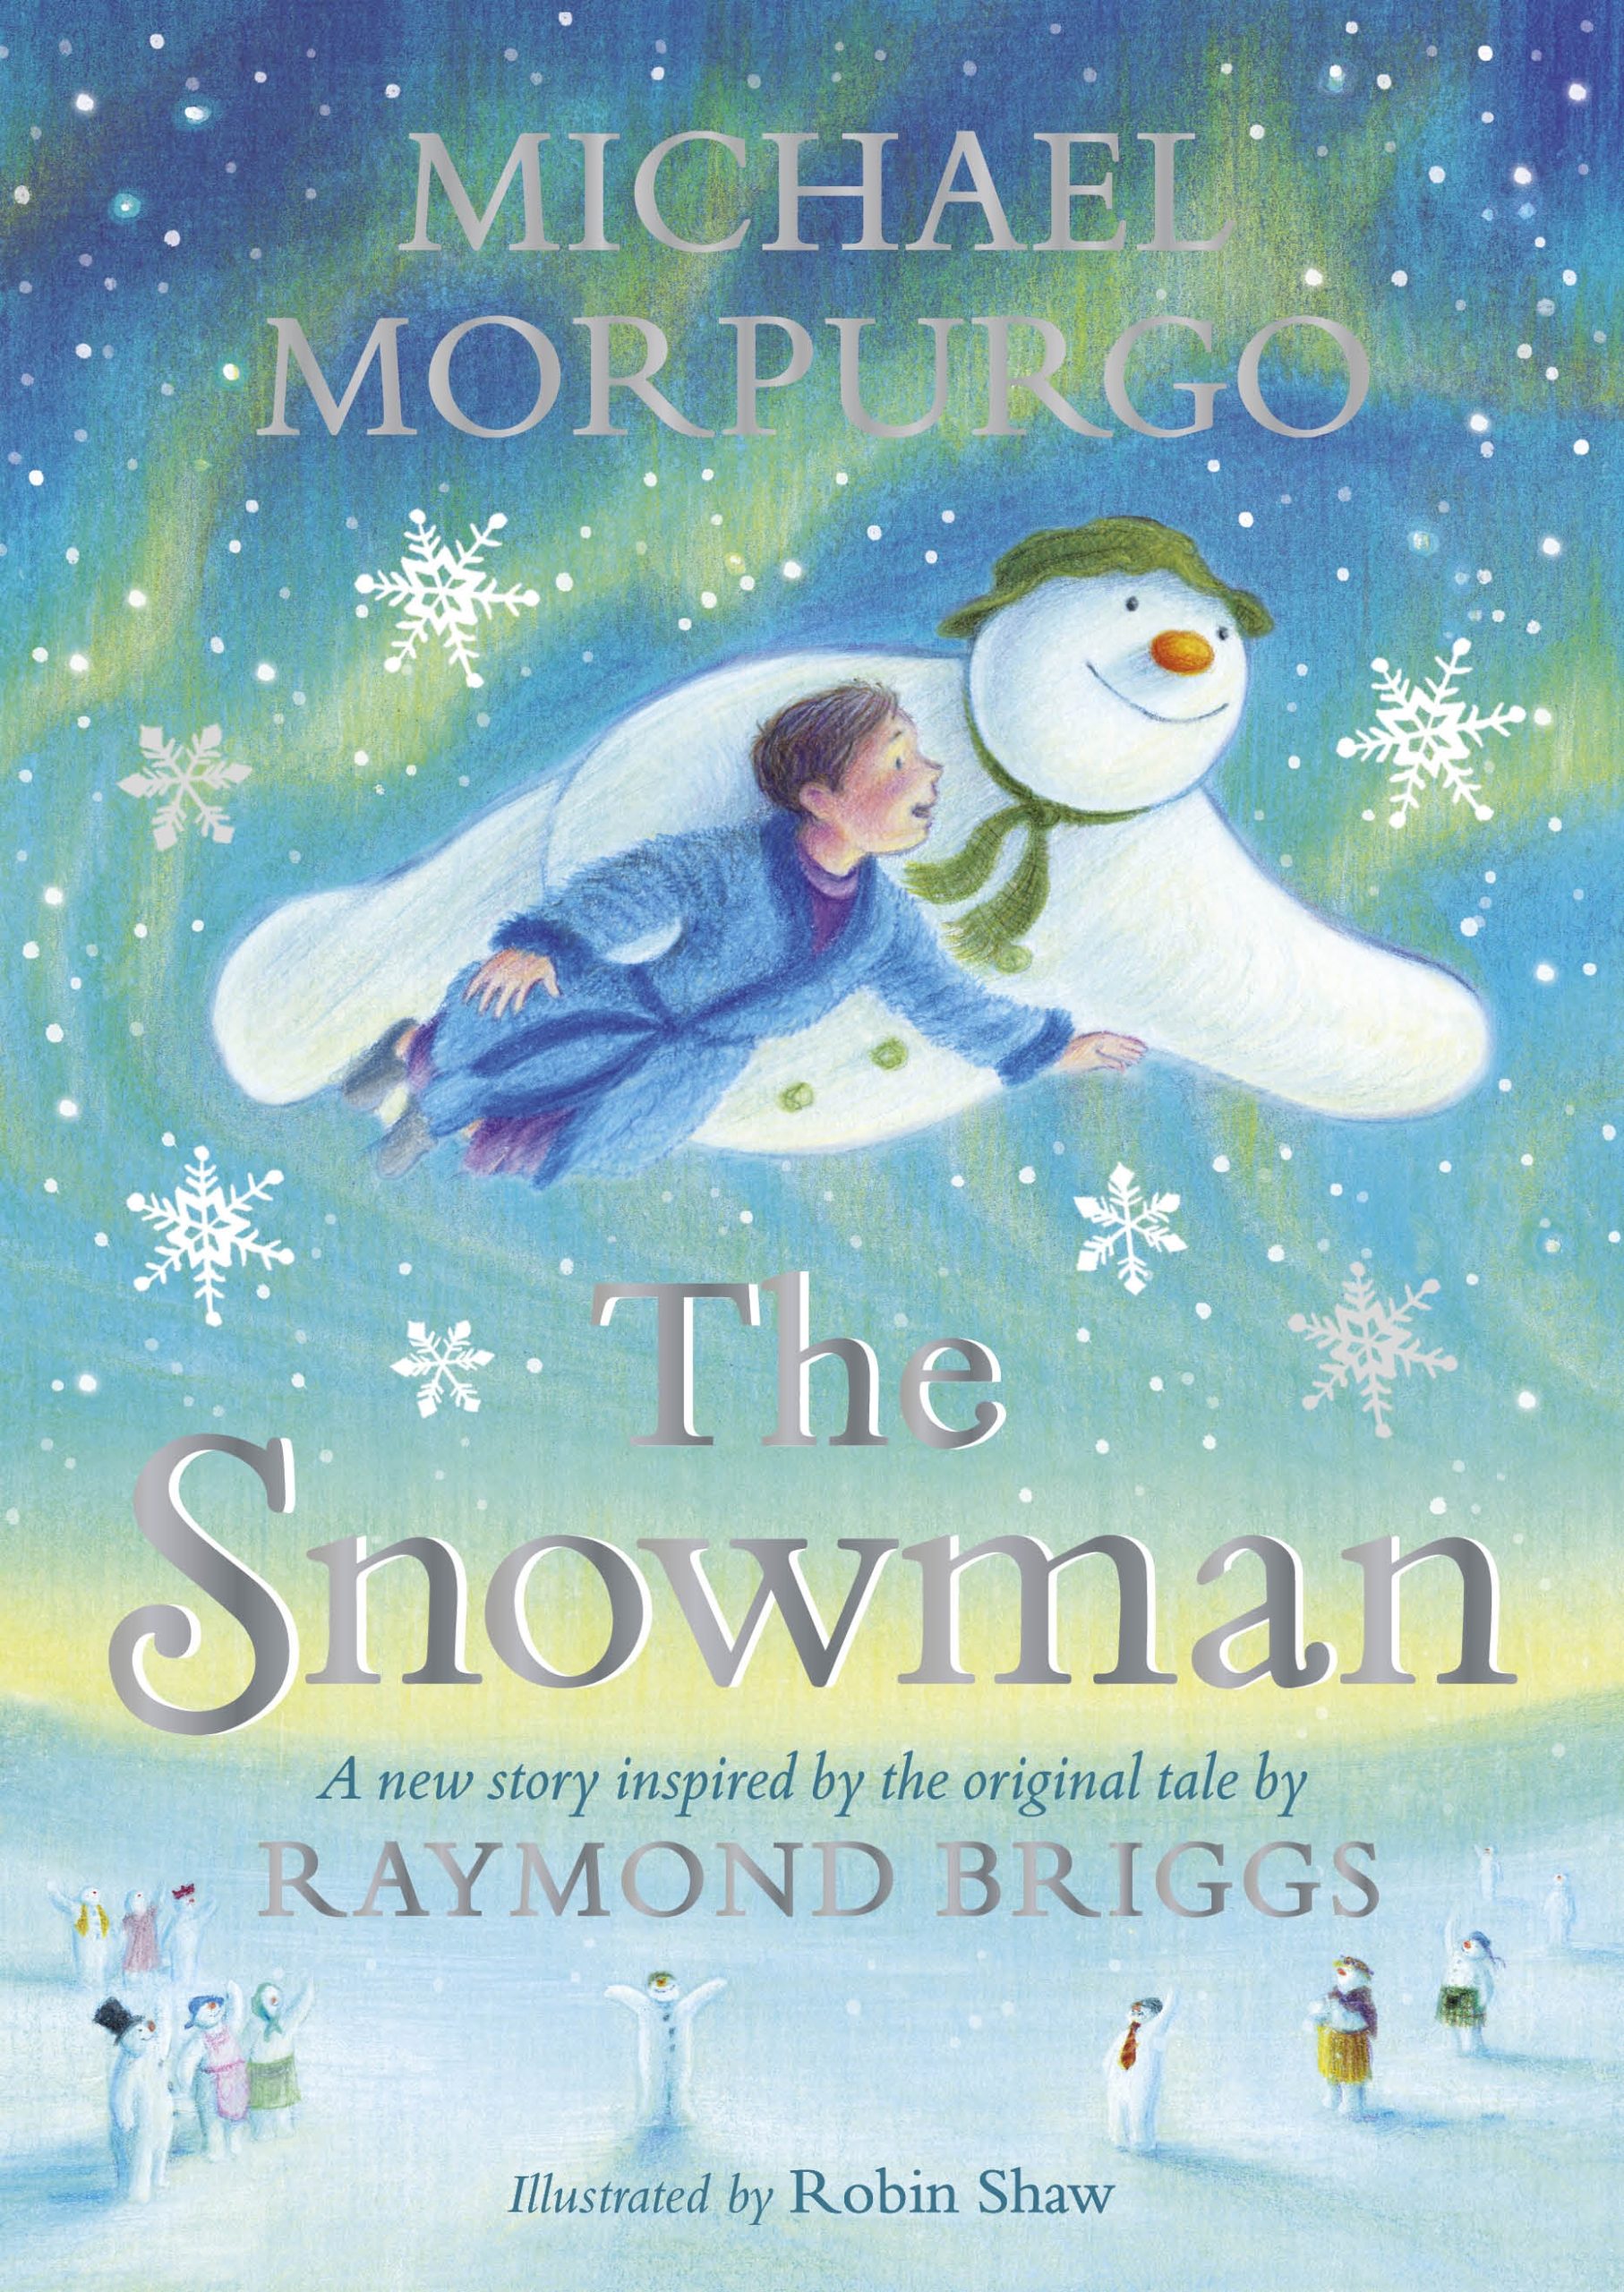 An image of the front cover of a new Snowman story book by Michael Morpurgo